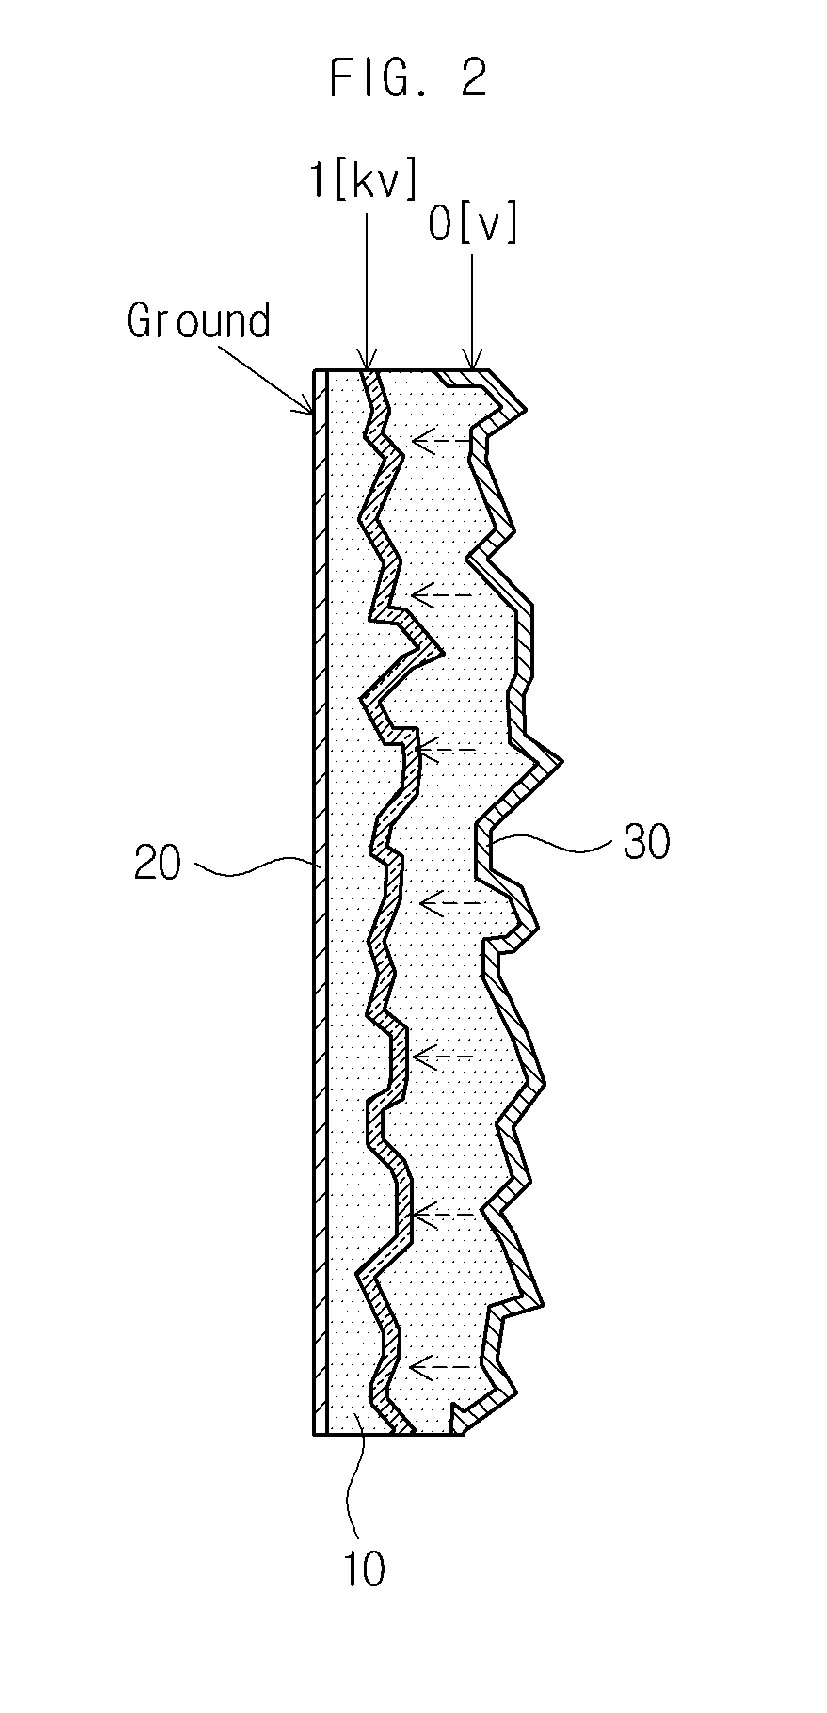 Active diffuser for reducing speckle and laser display device having active diffuser